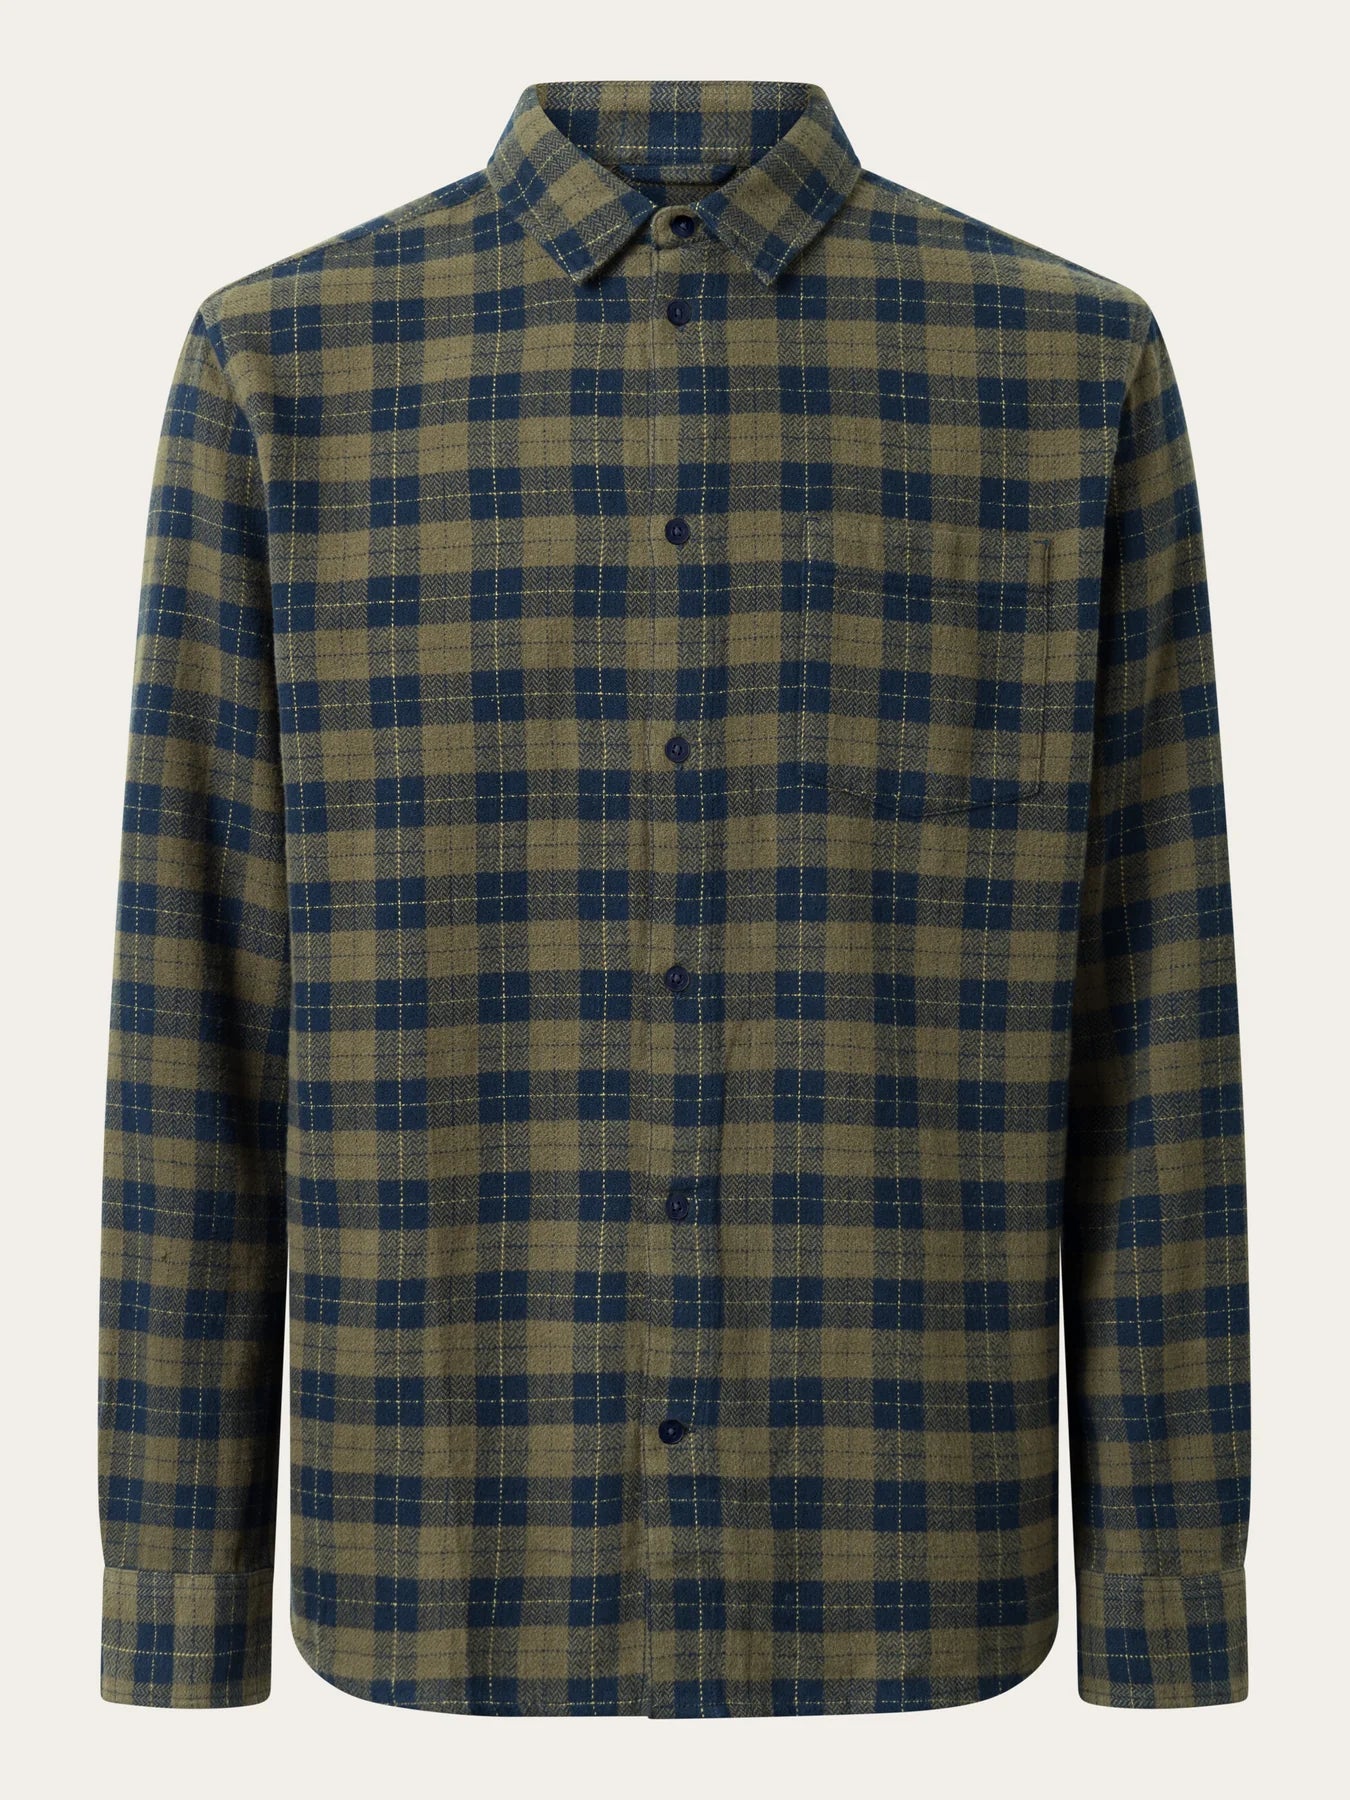 KnowledgeCotton Apparel M's Loose fit checkered shirt - 100% Organic Cotton Green Check Shirt